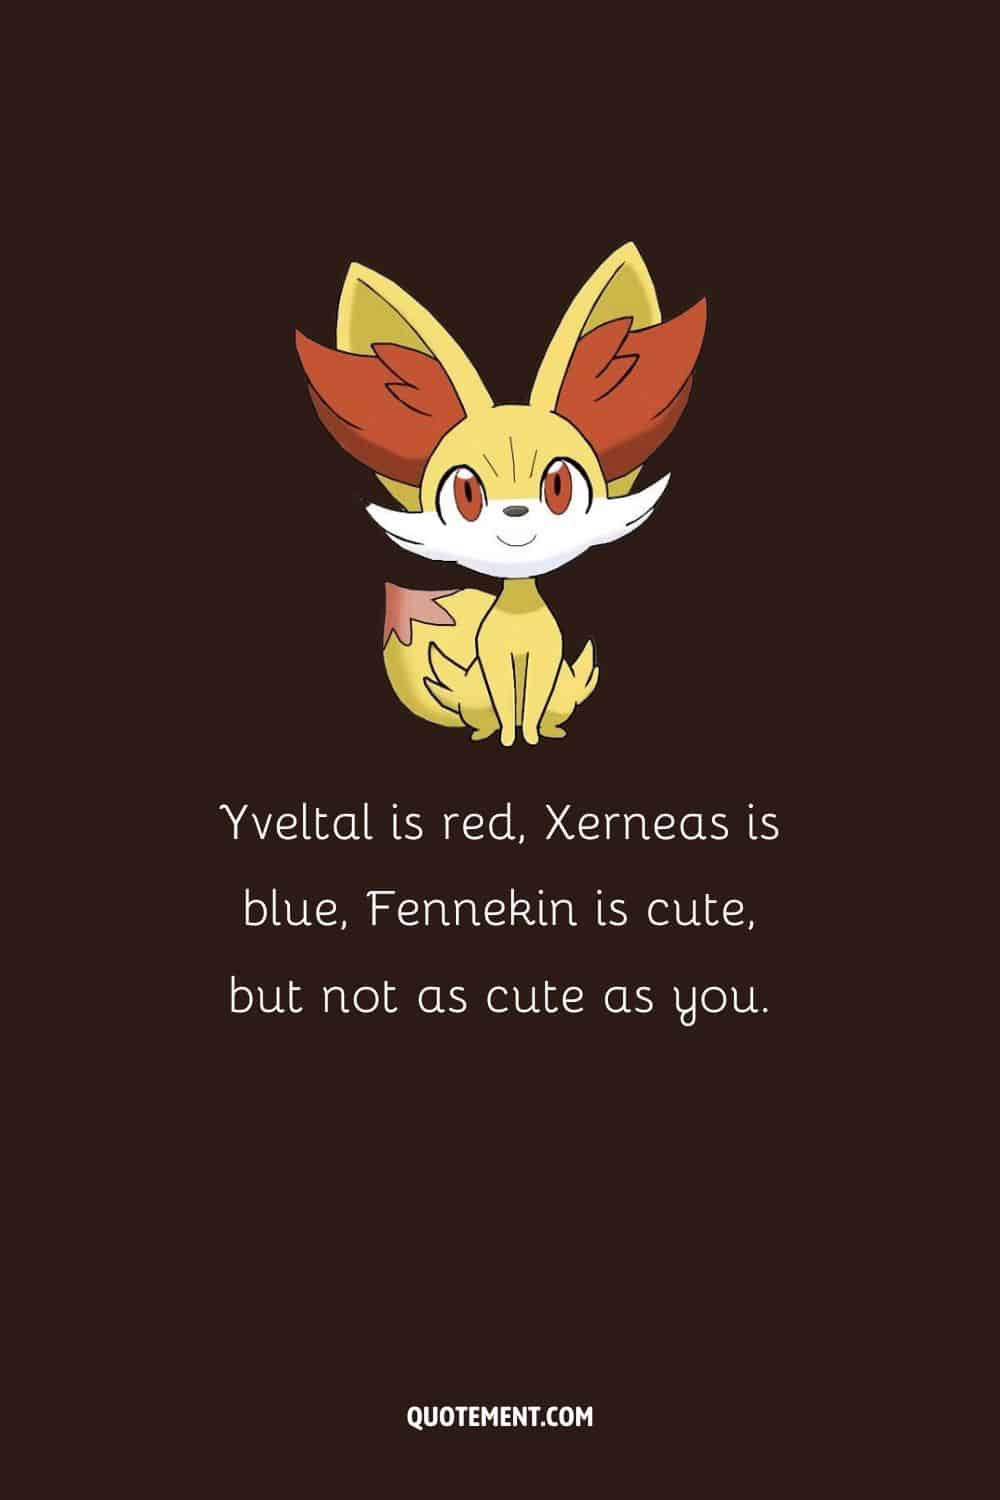 Cute Pokemon pick up line and the image of Fennekin